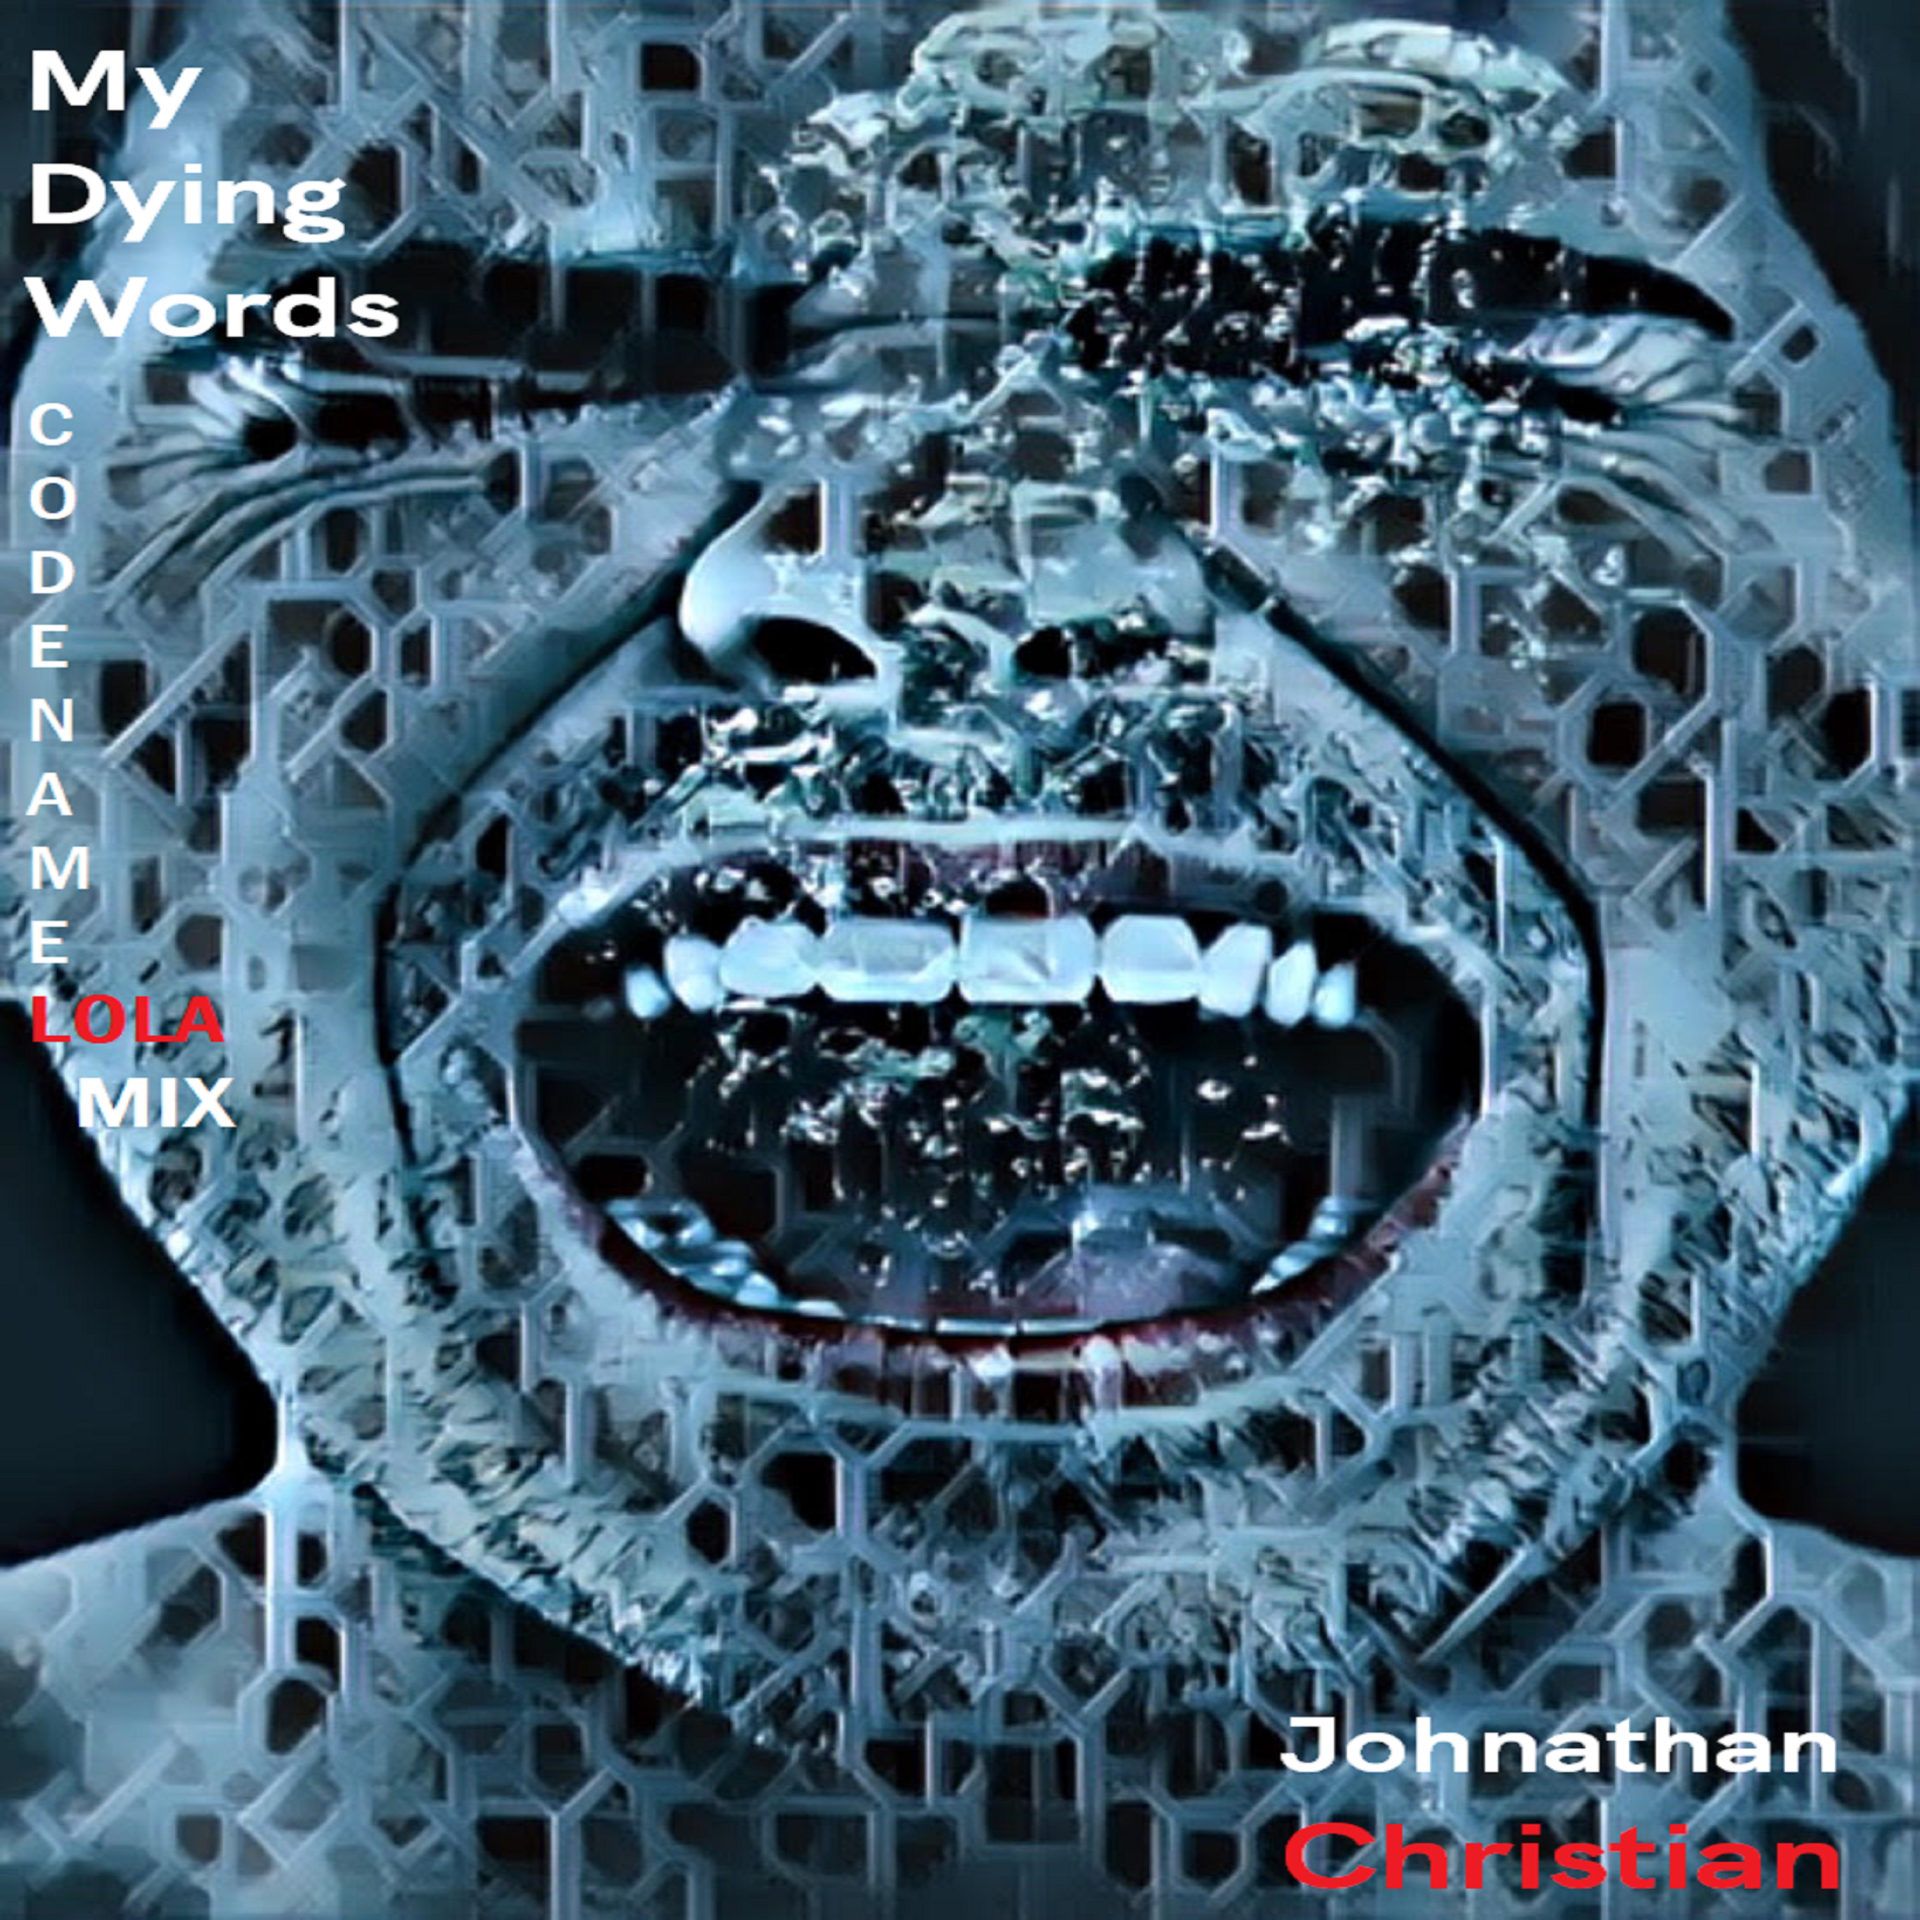 Johnathan|Christian Release “My Dying Words (Codename: Lola Mix)